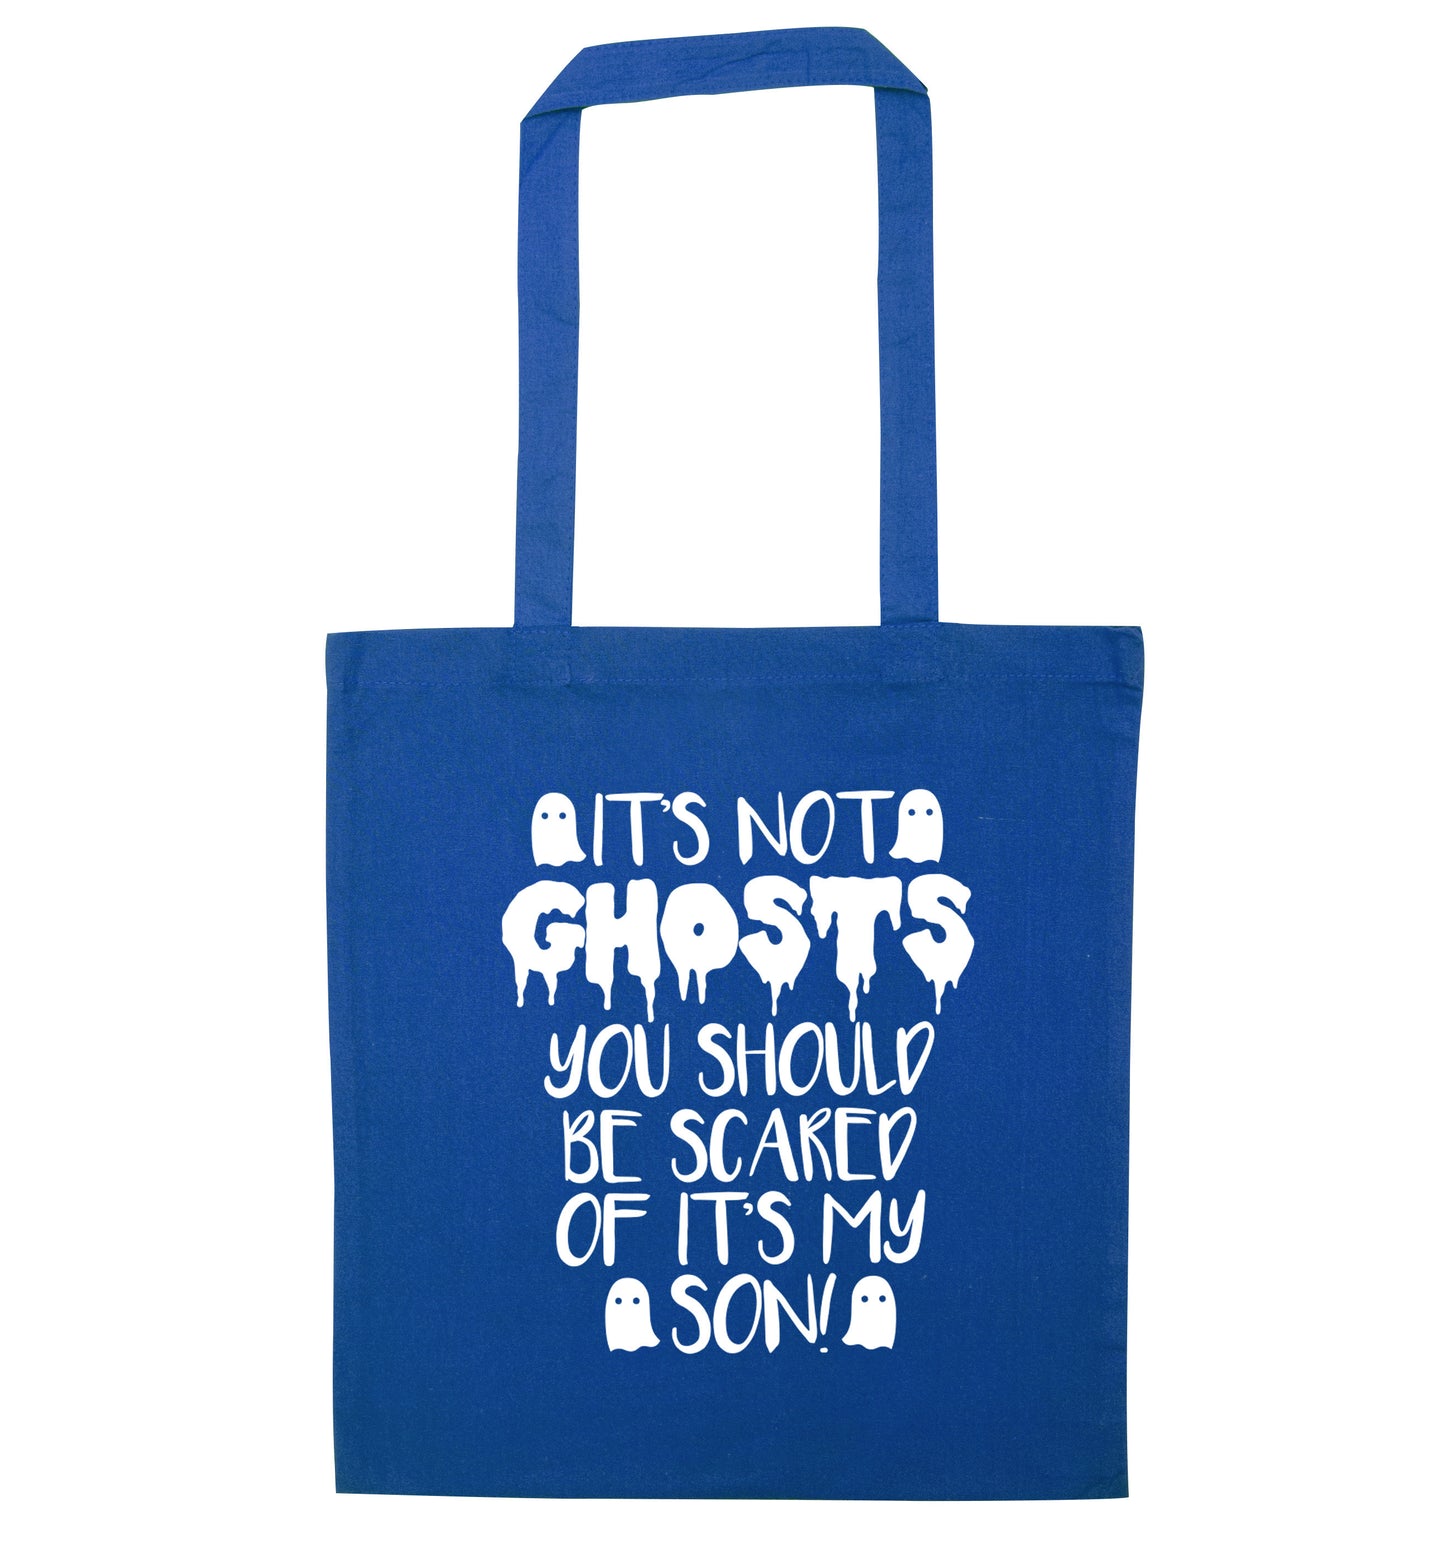 It's not ghosts you should be scared of it's my son! blue tote bag